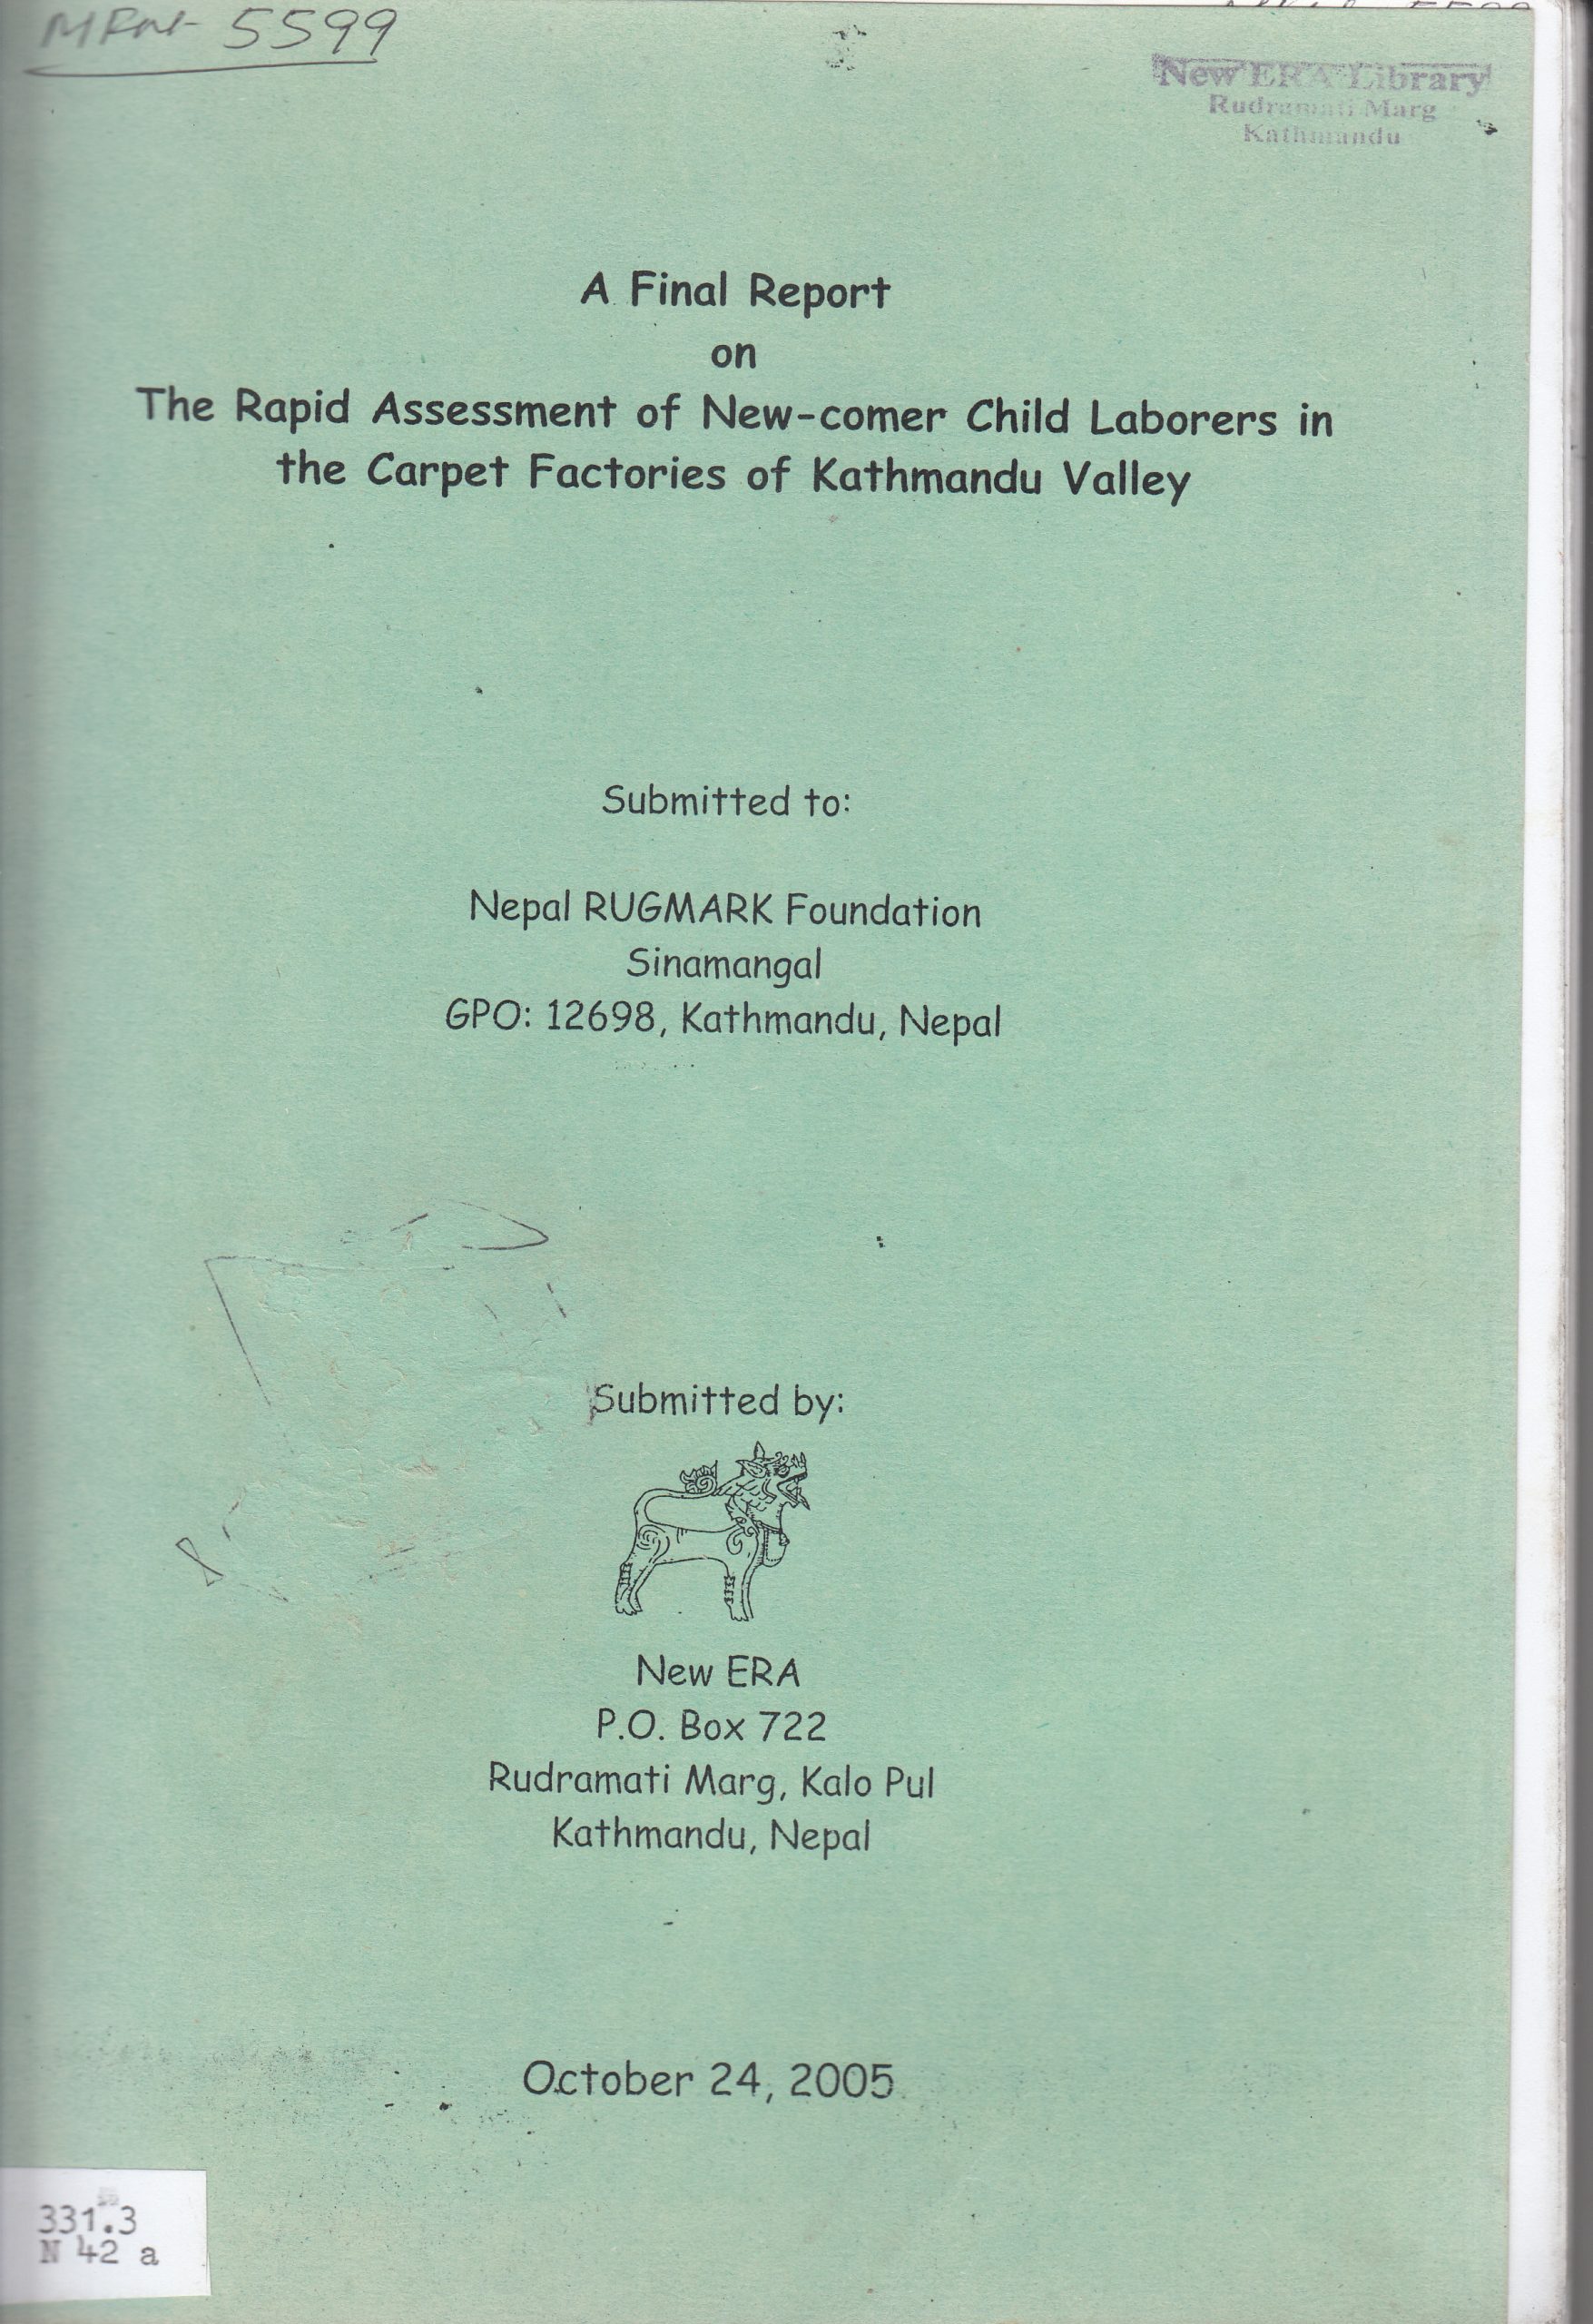 The Rapid Assessment of Newcomer Child Laborers in the Carpet Factories of Kathmandu Valley